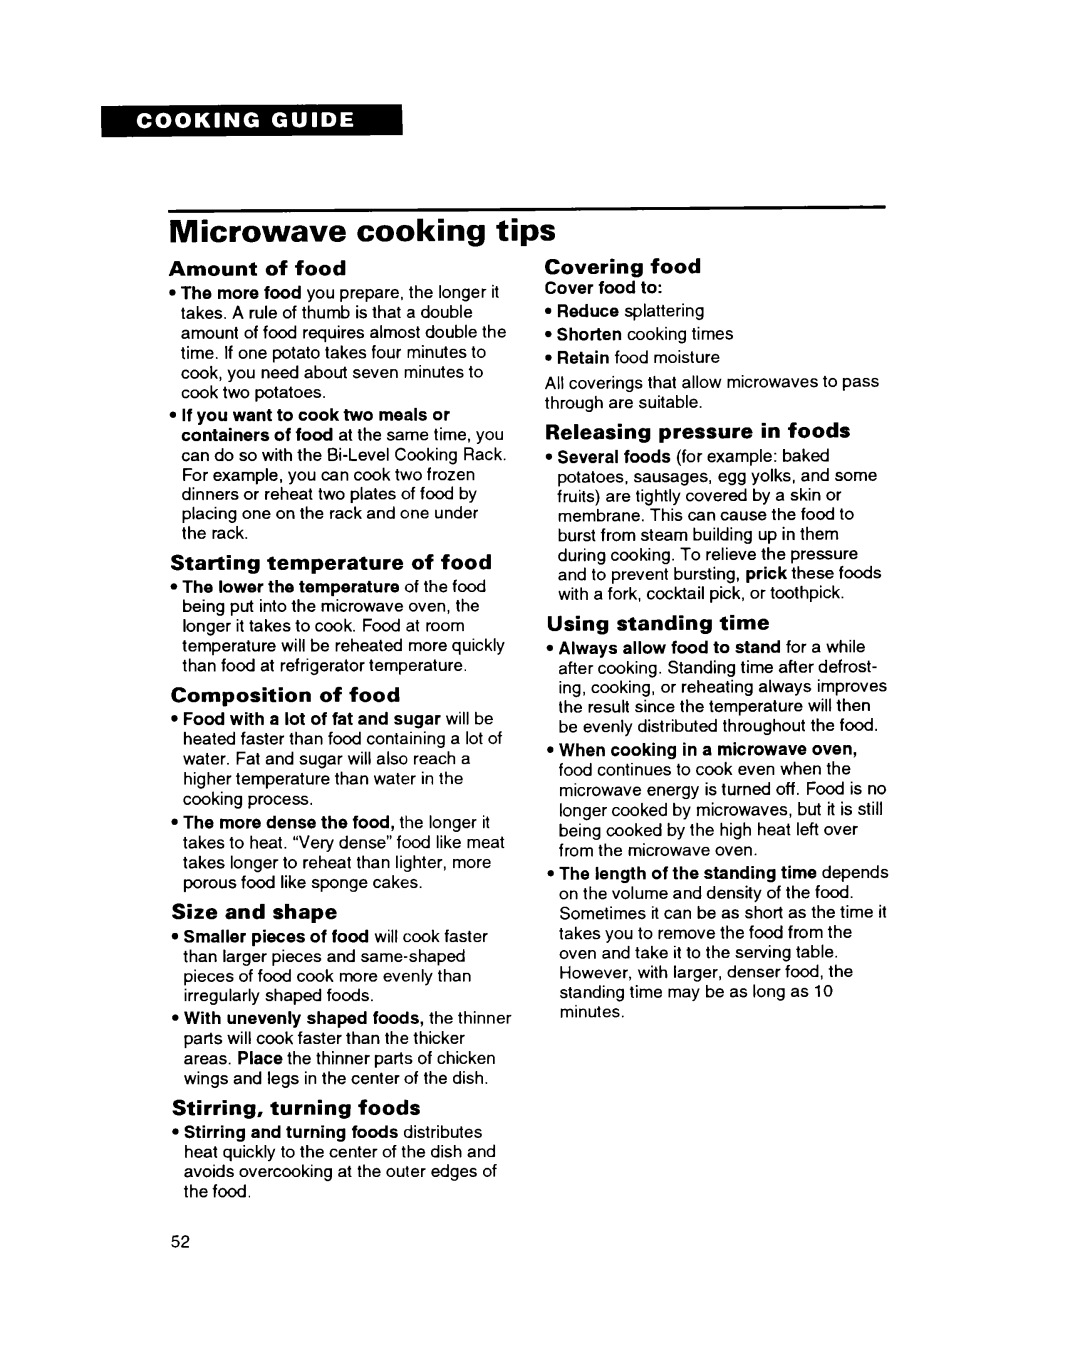 Whirlpool MH7110XB warranty Microwave cooking tips, Amount of food, Starting temperature of food, Composition of food 